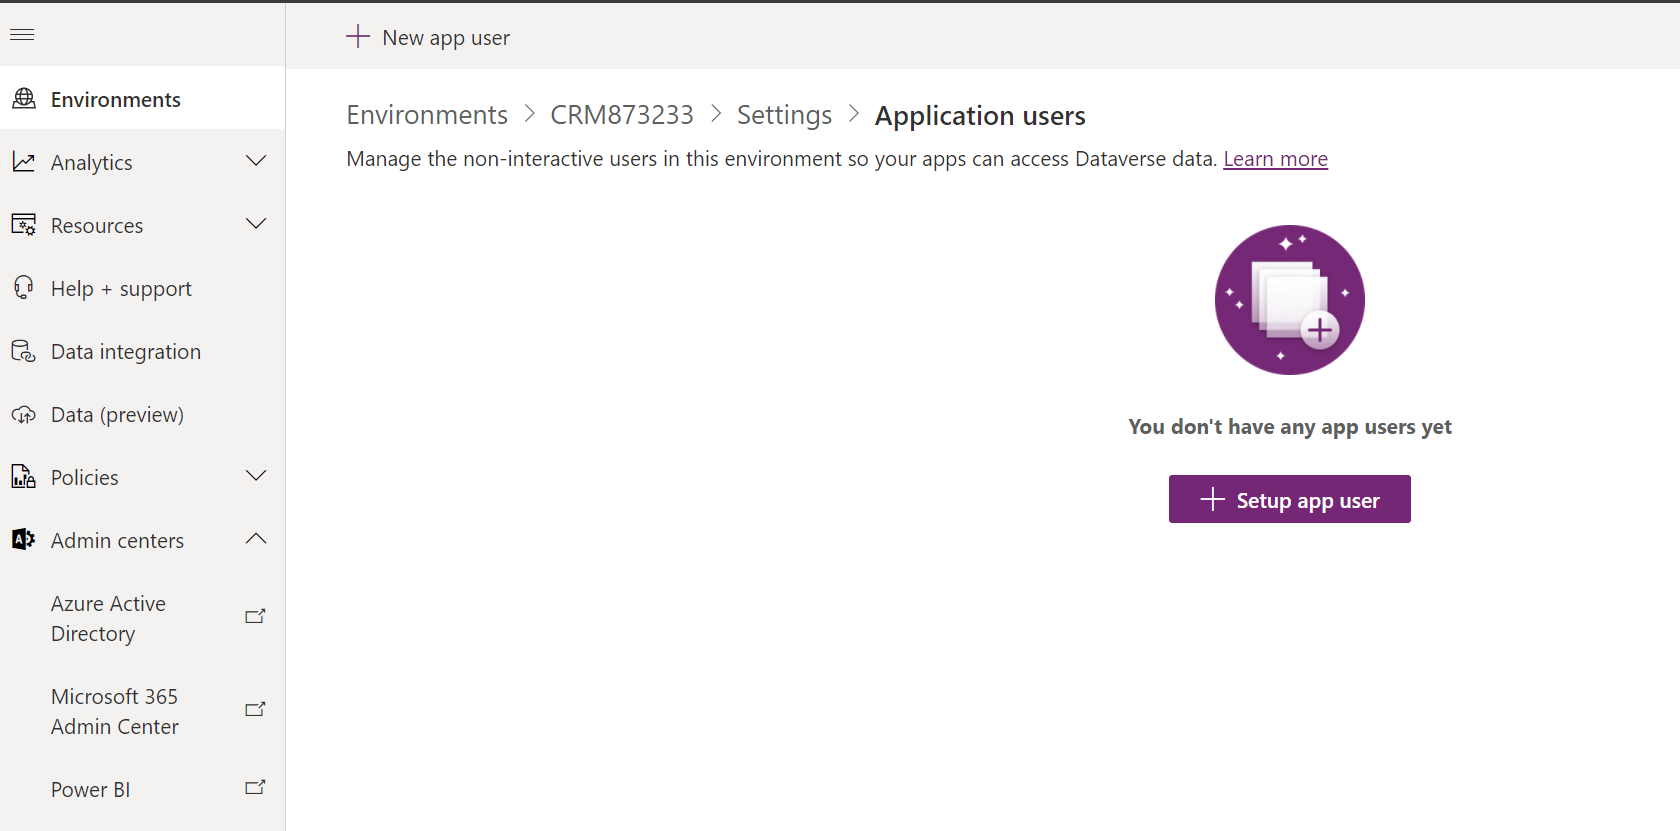 Image shows the add new application users page